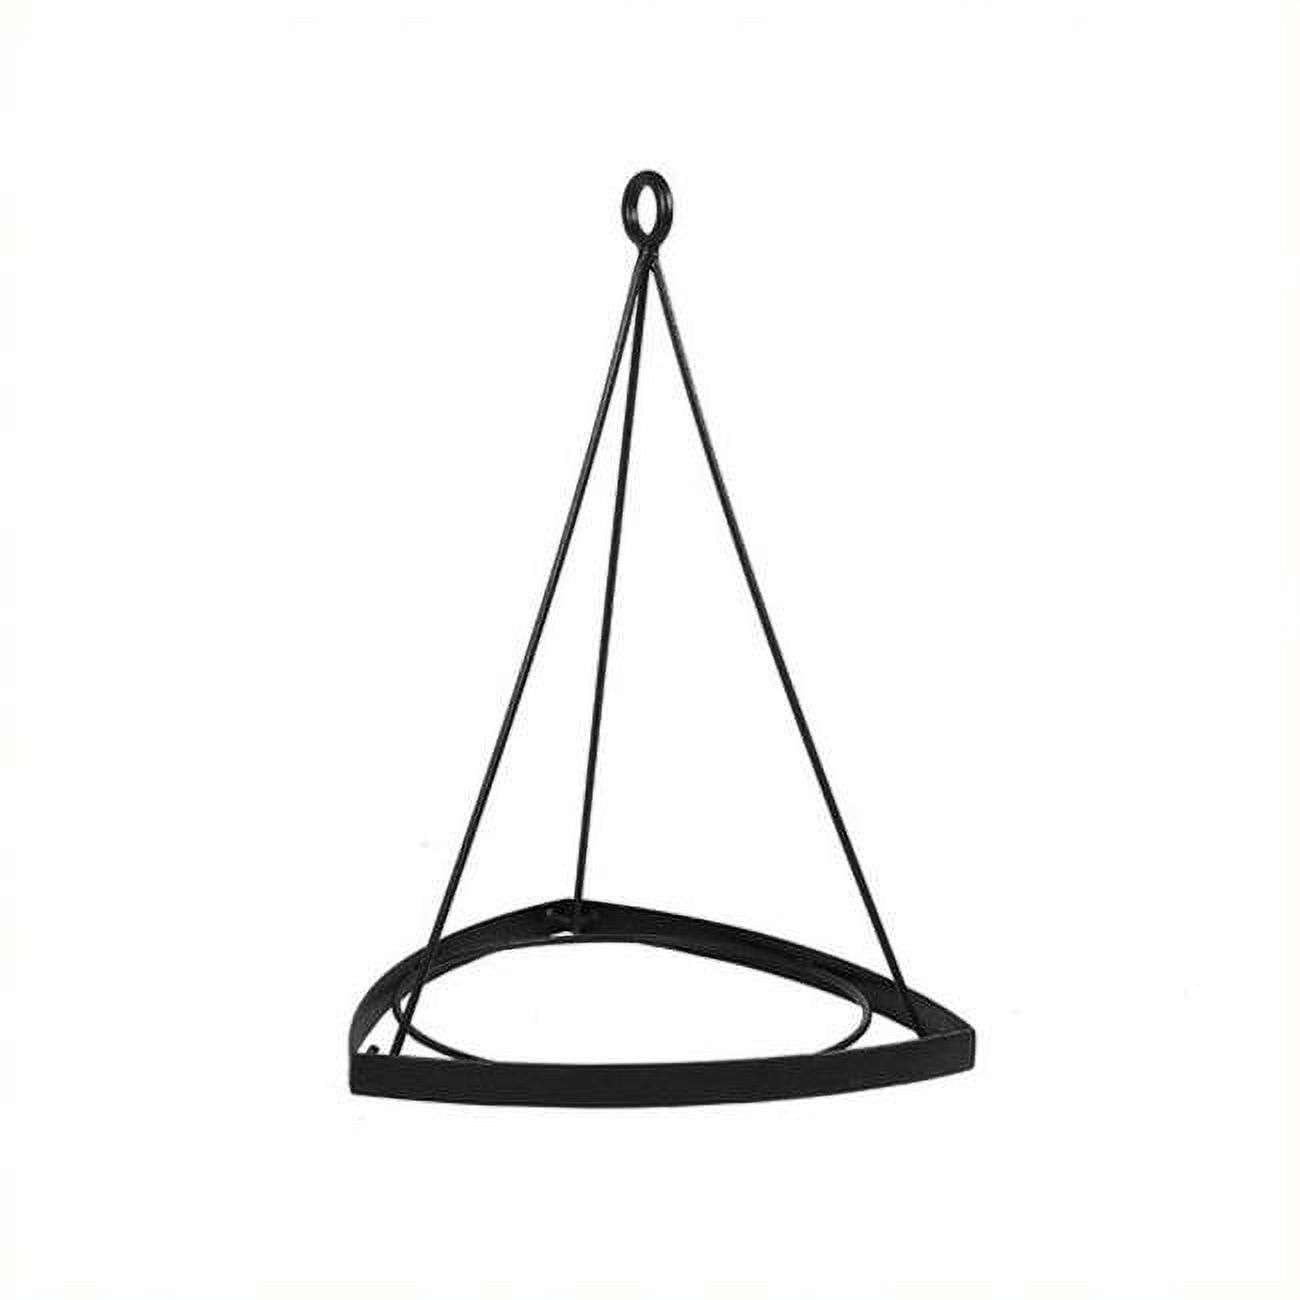 Achla BH-02 10.25 in. Lina II Plant Hanger - image 1 of 2